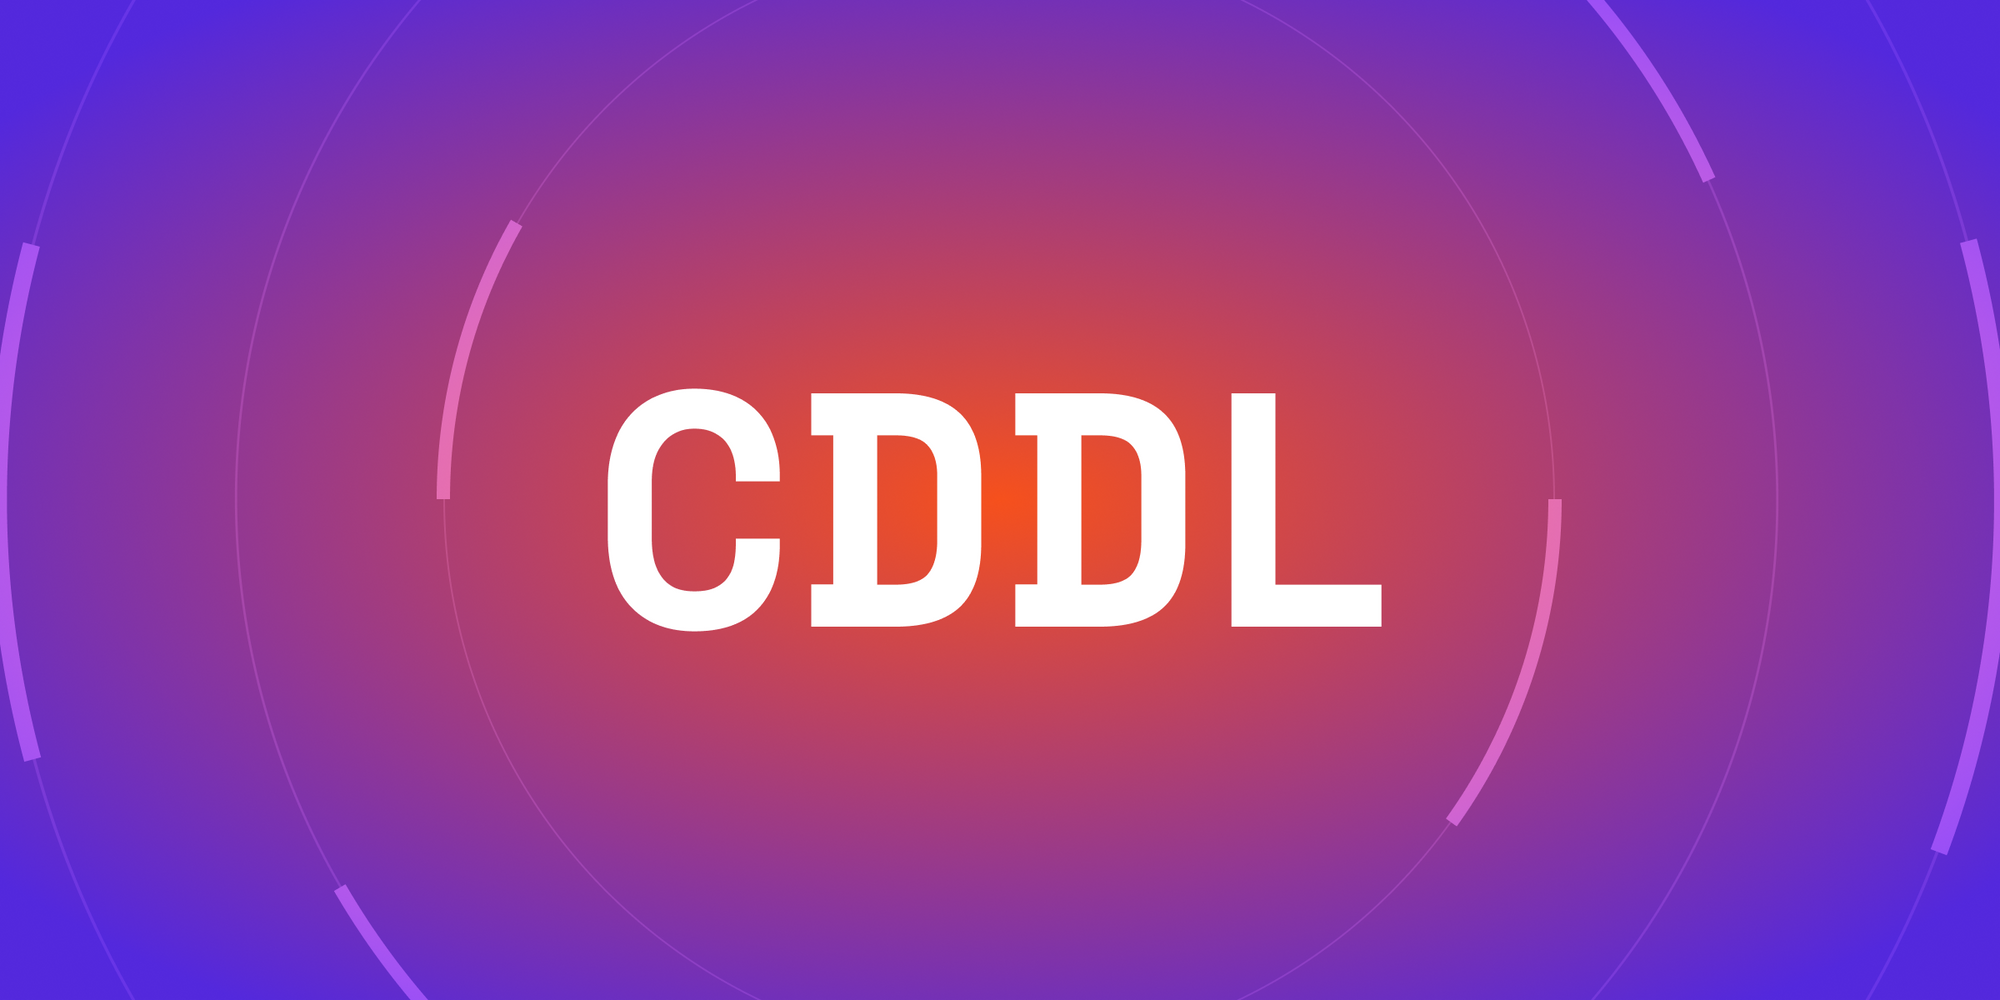 Open Source Licenses 101: The CDDL (Common Development and Distribution License)